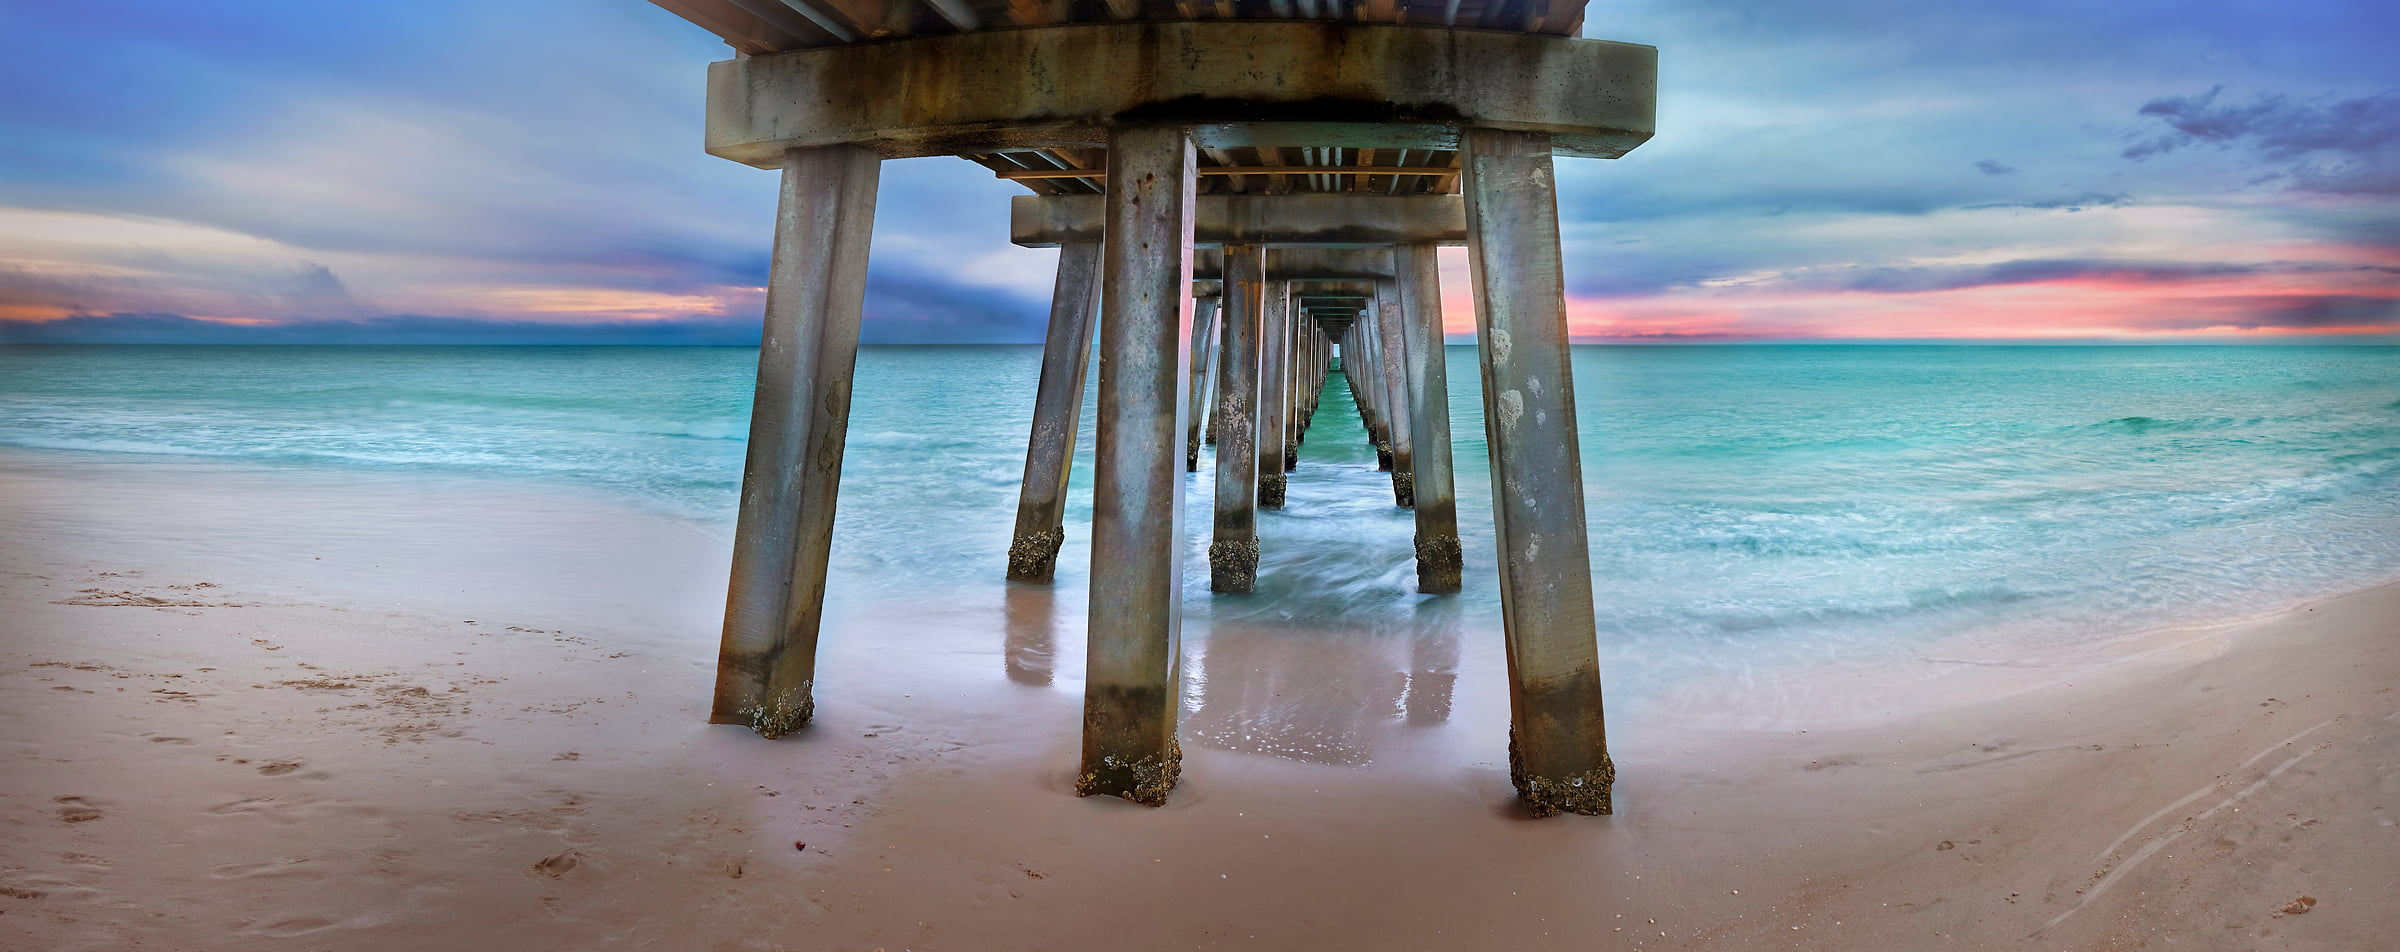 216 megapixels! A very high resolution photo of the beach and ocean under a pier; VAST photo created by Phil Crawshay in Naples Pier, Florida, USA.